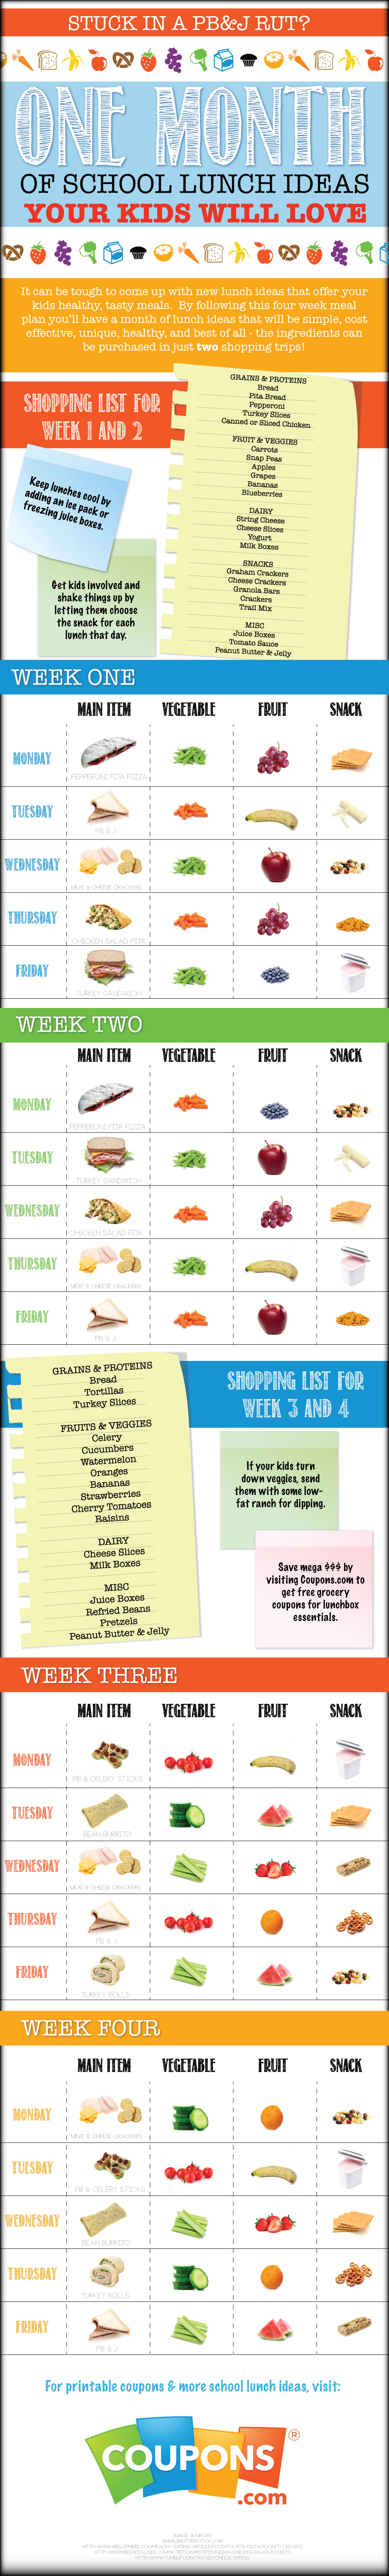 DIY school lunches infographic - www.coupons.com/blog/easy-school-lunch-ideas-infographic